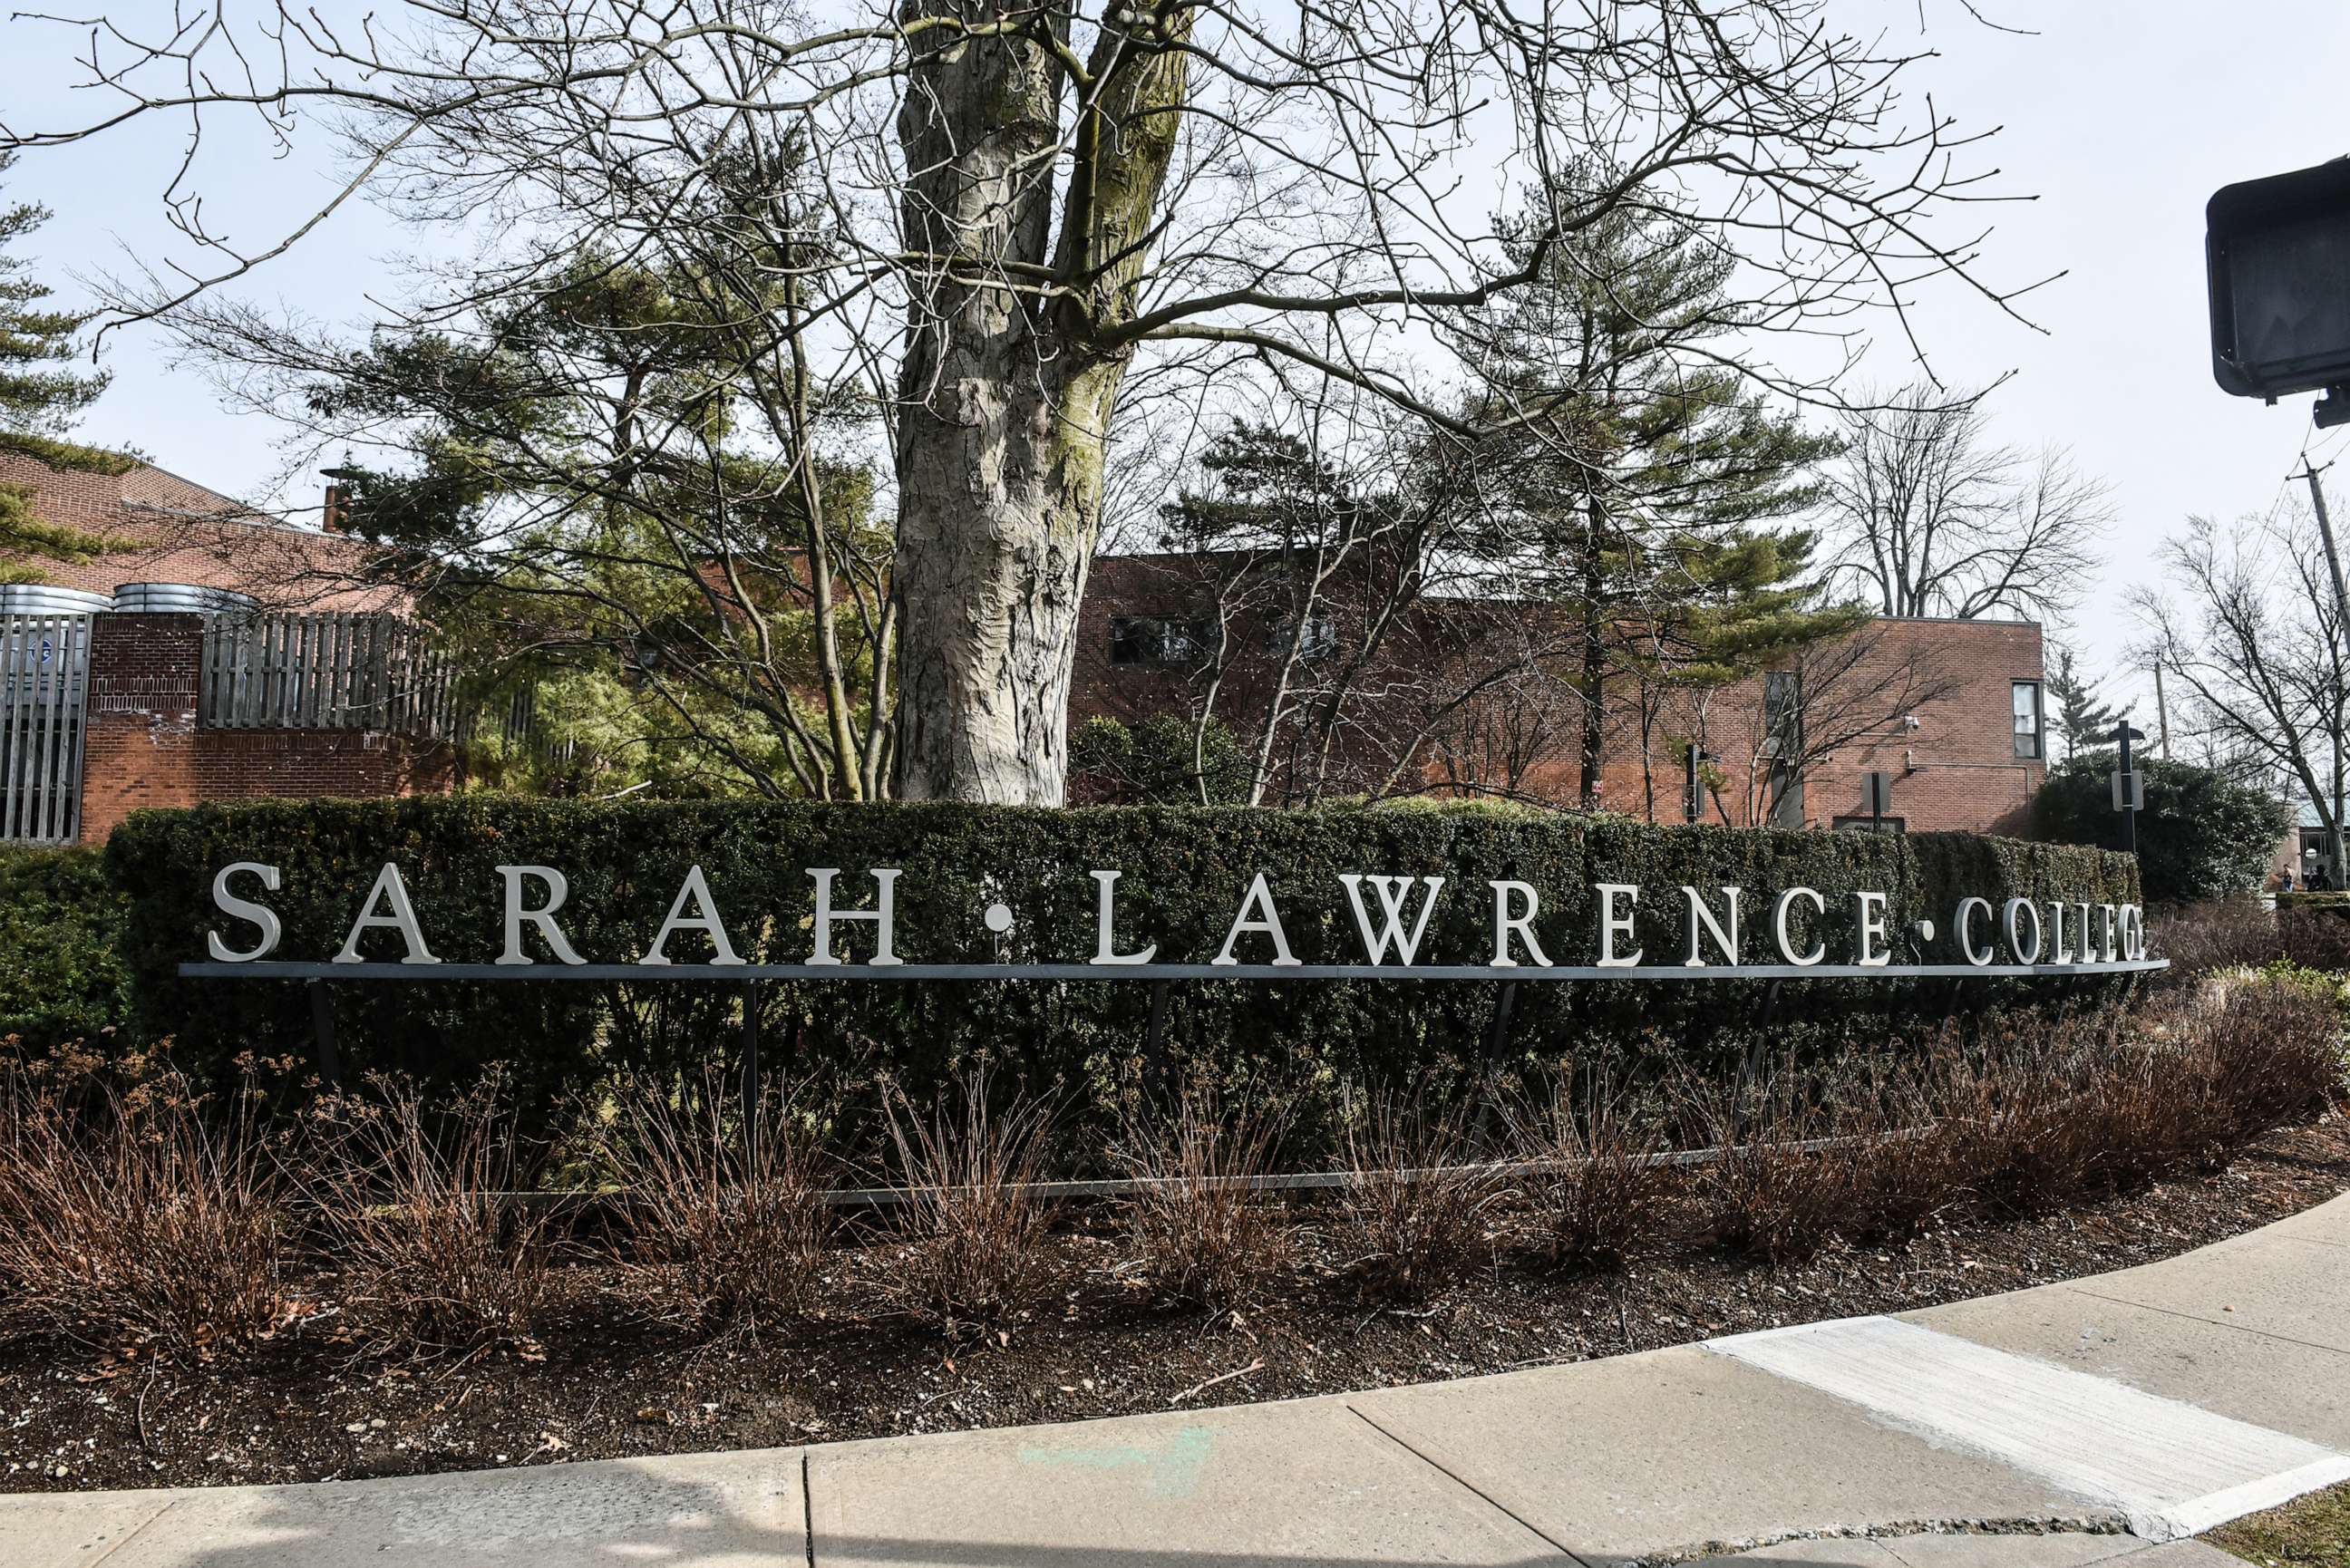 PHOTO: BIn this Feb. 12, 2020, file photo, a view of Sarah Lawrence College is seen in Bronxville, N.Y.